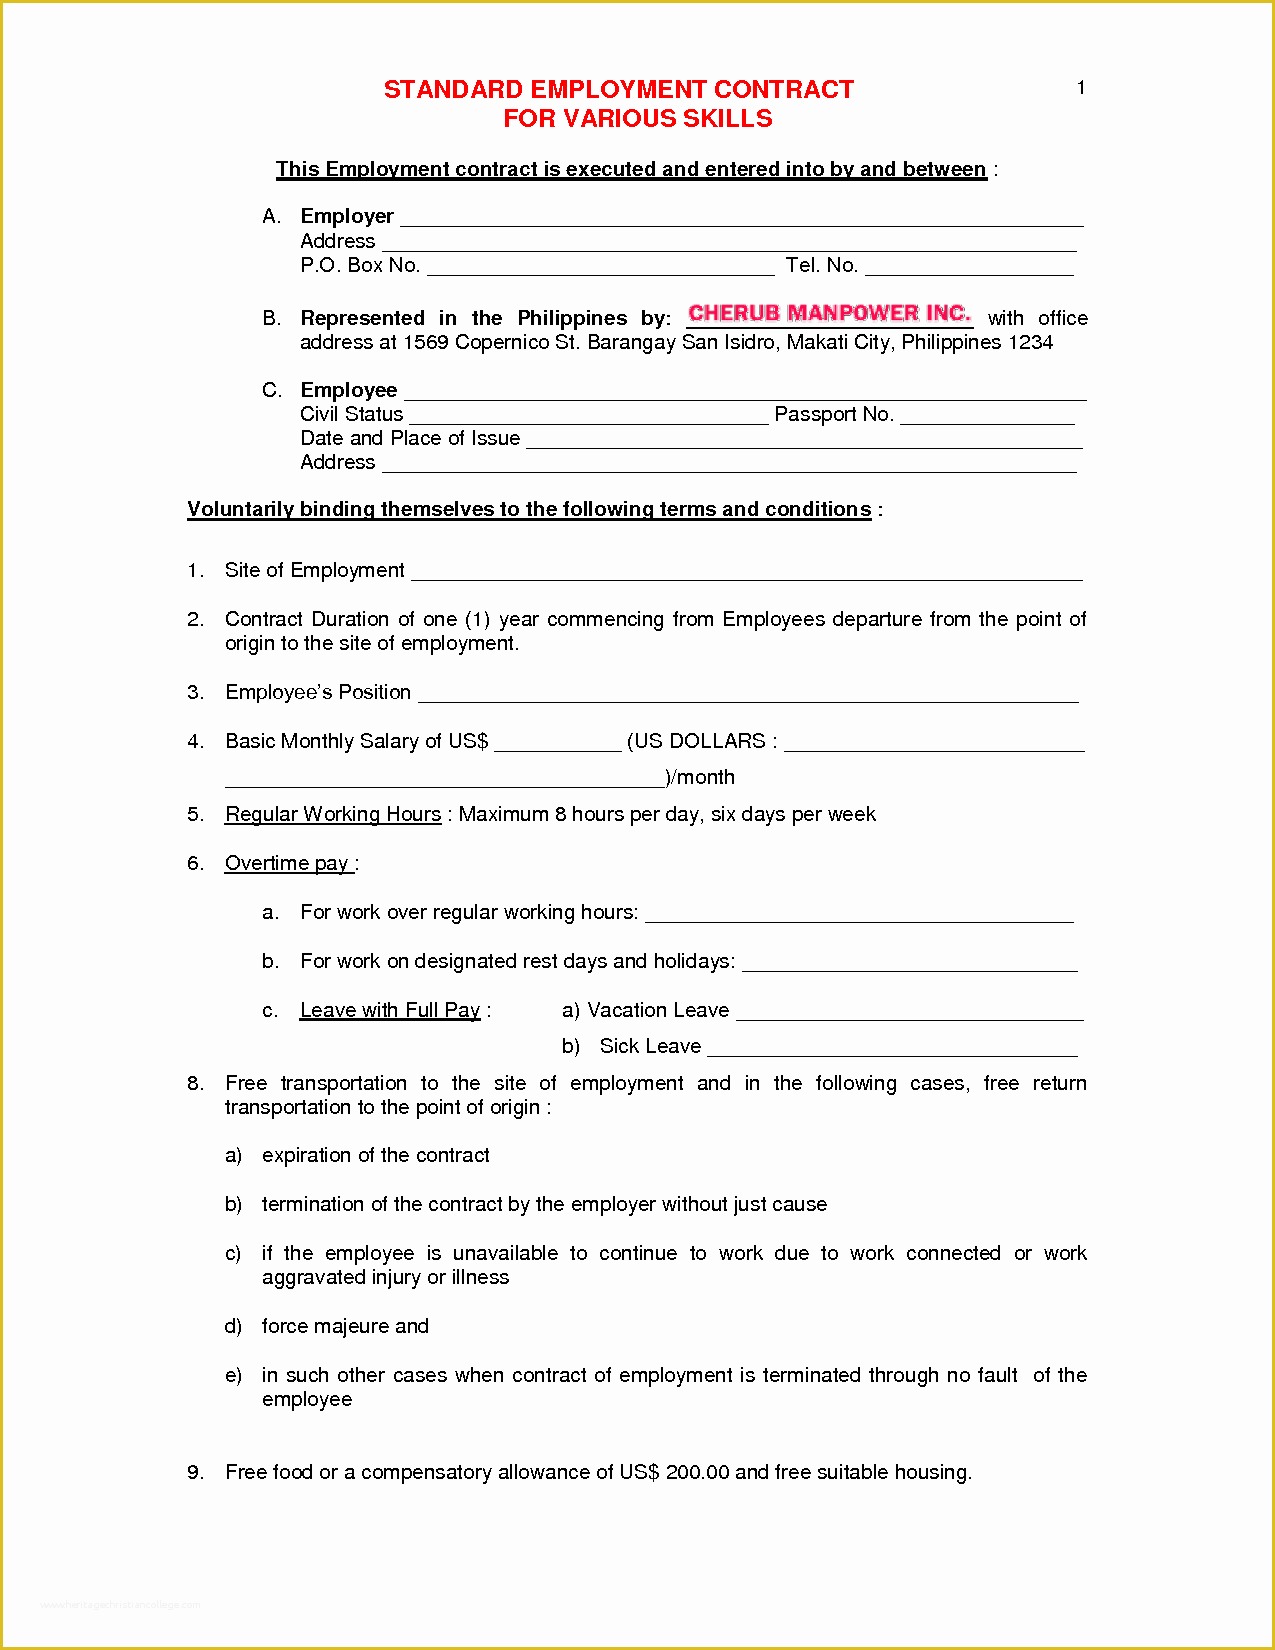 Employment Contract Template Free Of Free Employment Contract Agreement Template Image Gallery